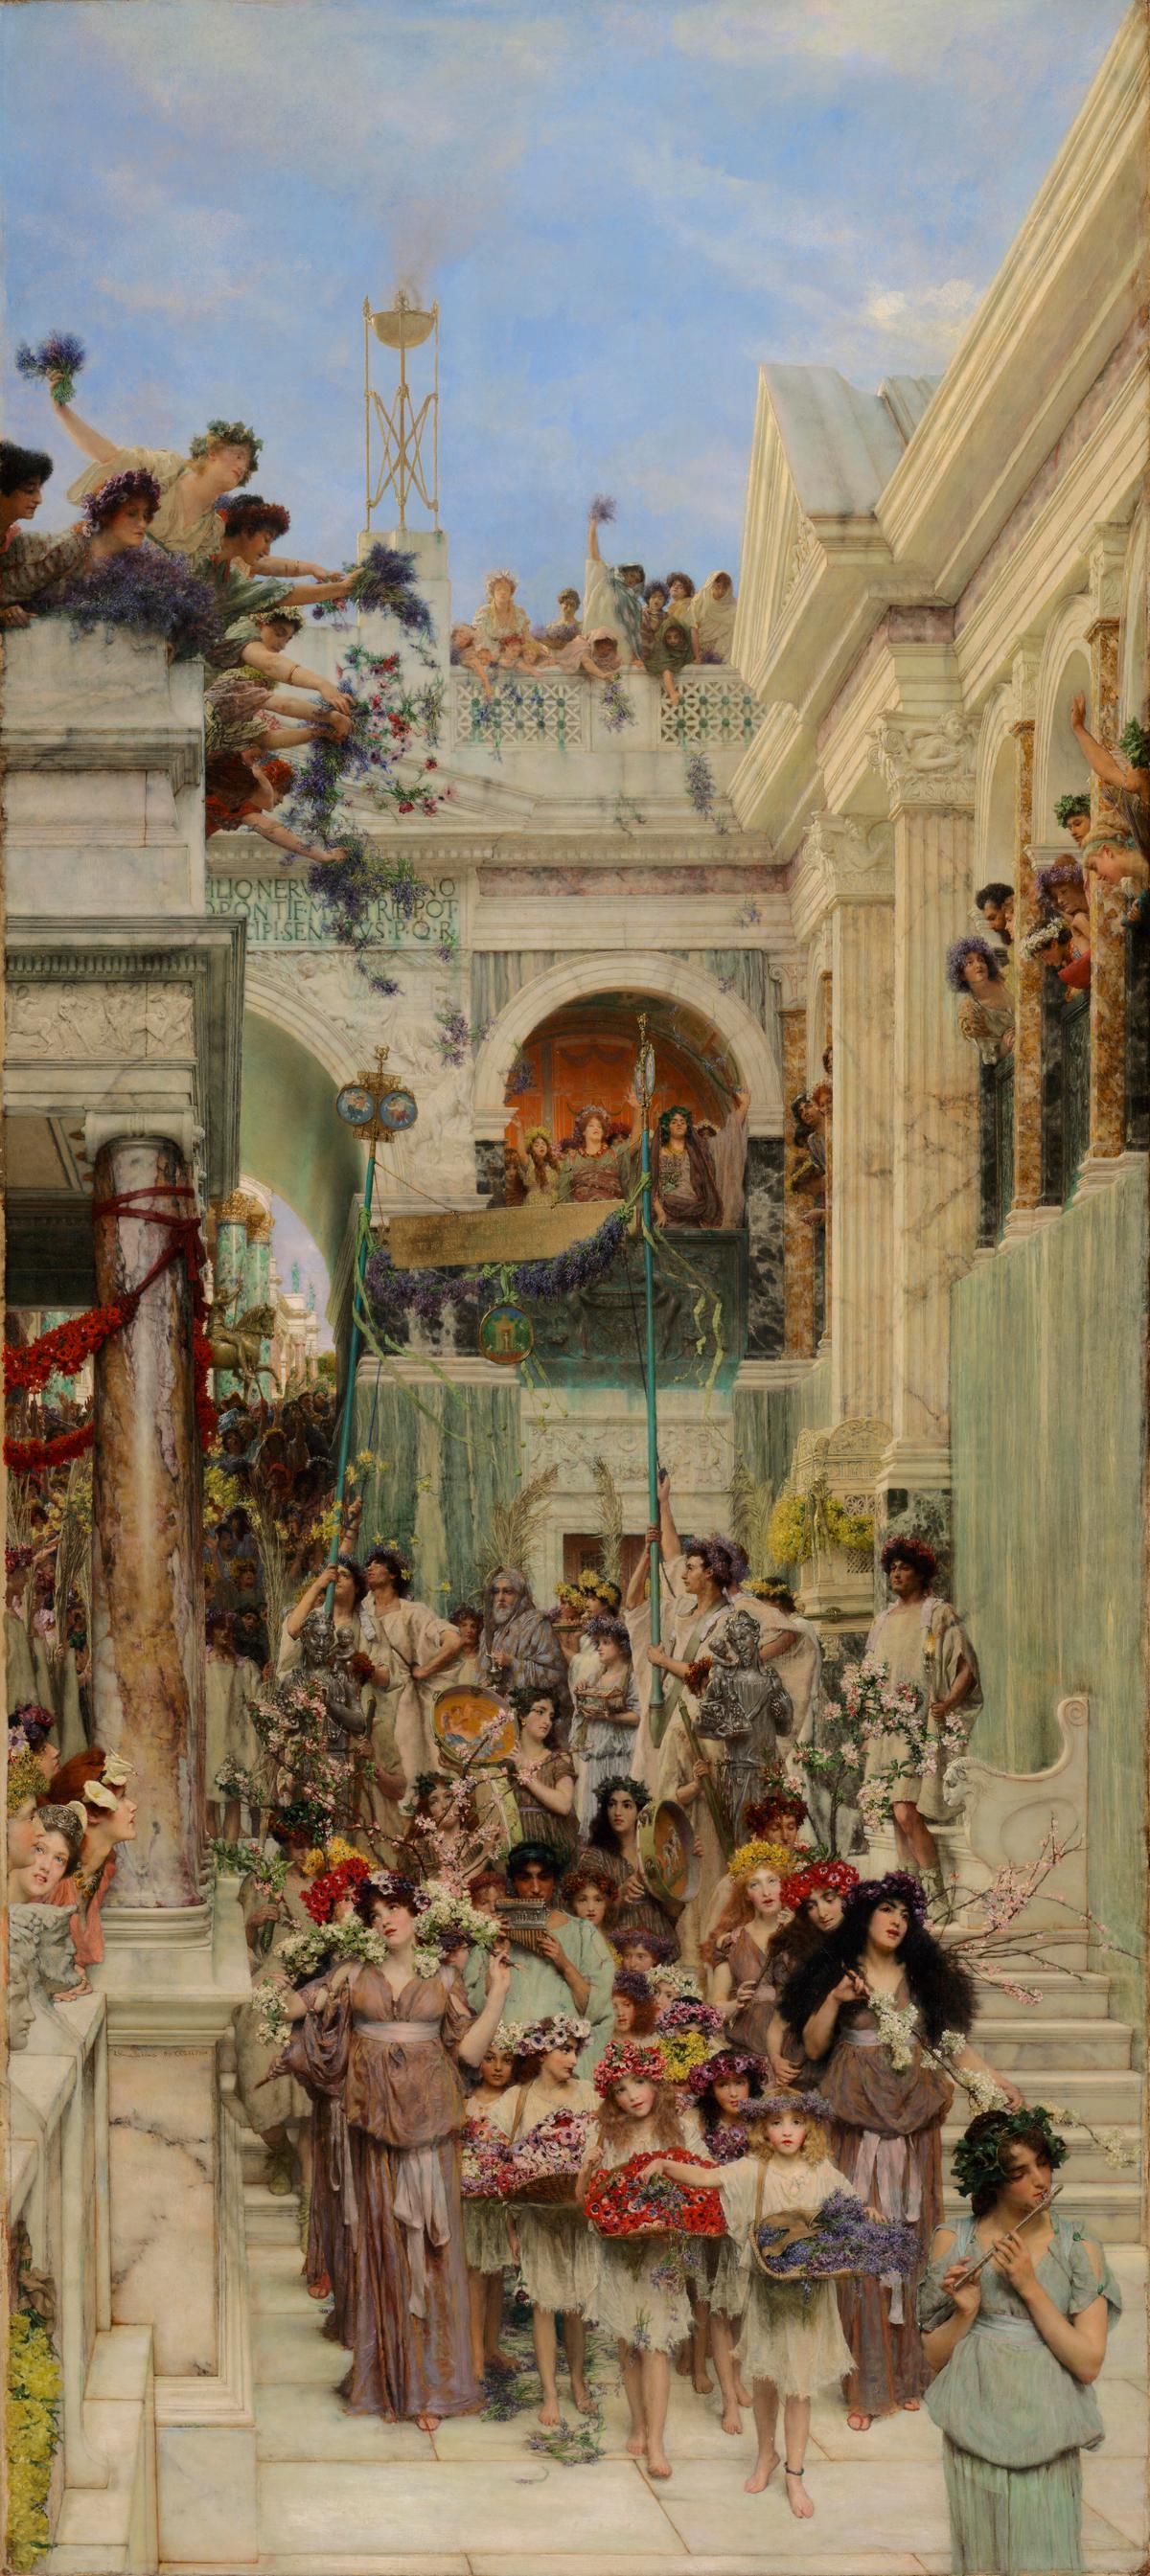 "Spring," 1894, by Lawrence Alma-Tadema. Oil on canvas; 70 1/5 inches by 31 3/5 inches. Getty Center, Los Angeles. (Public Domain)